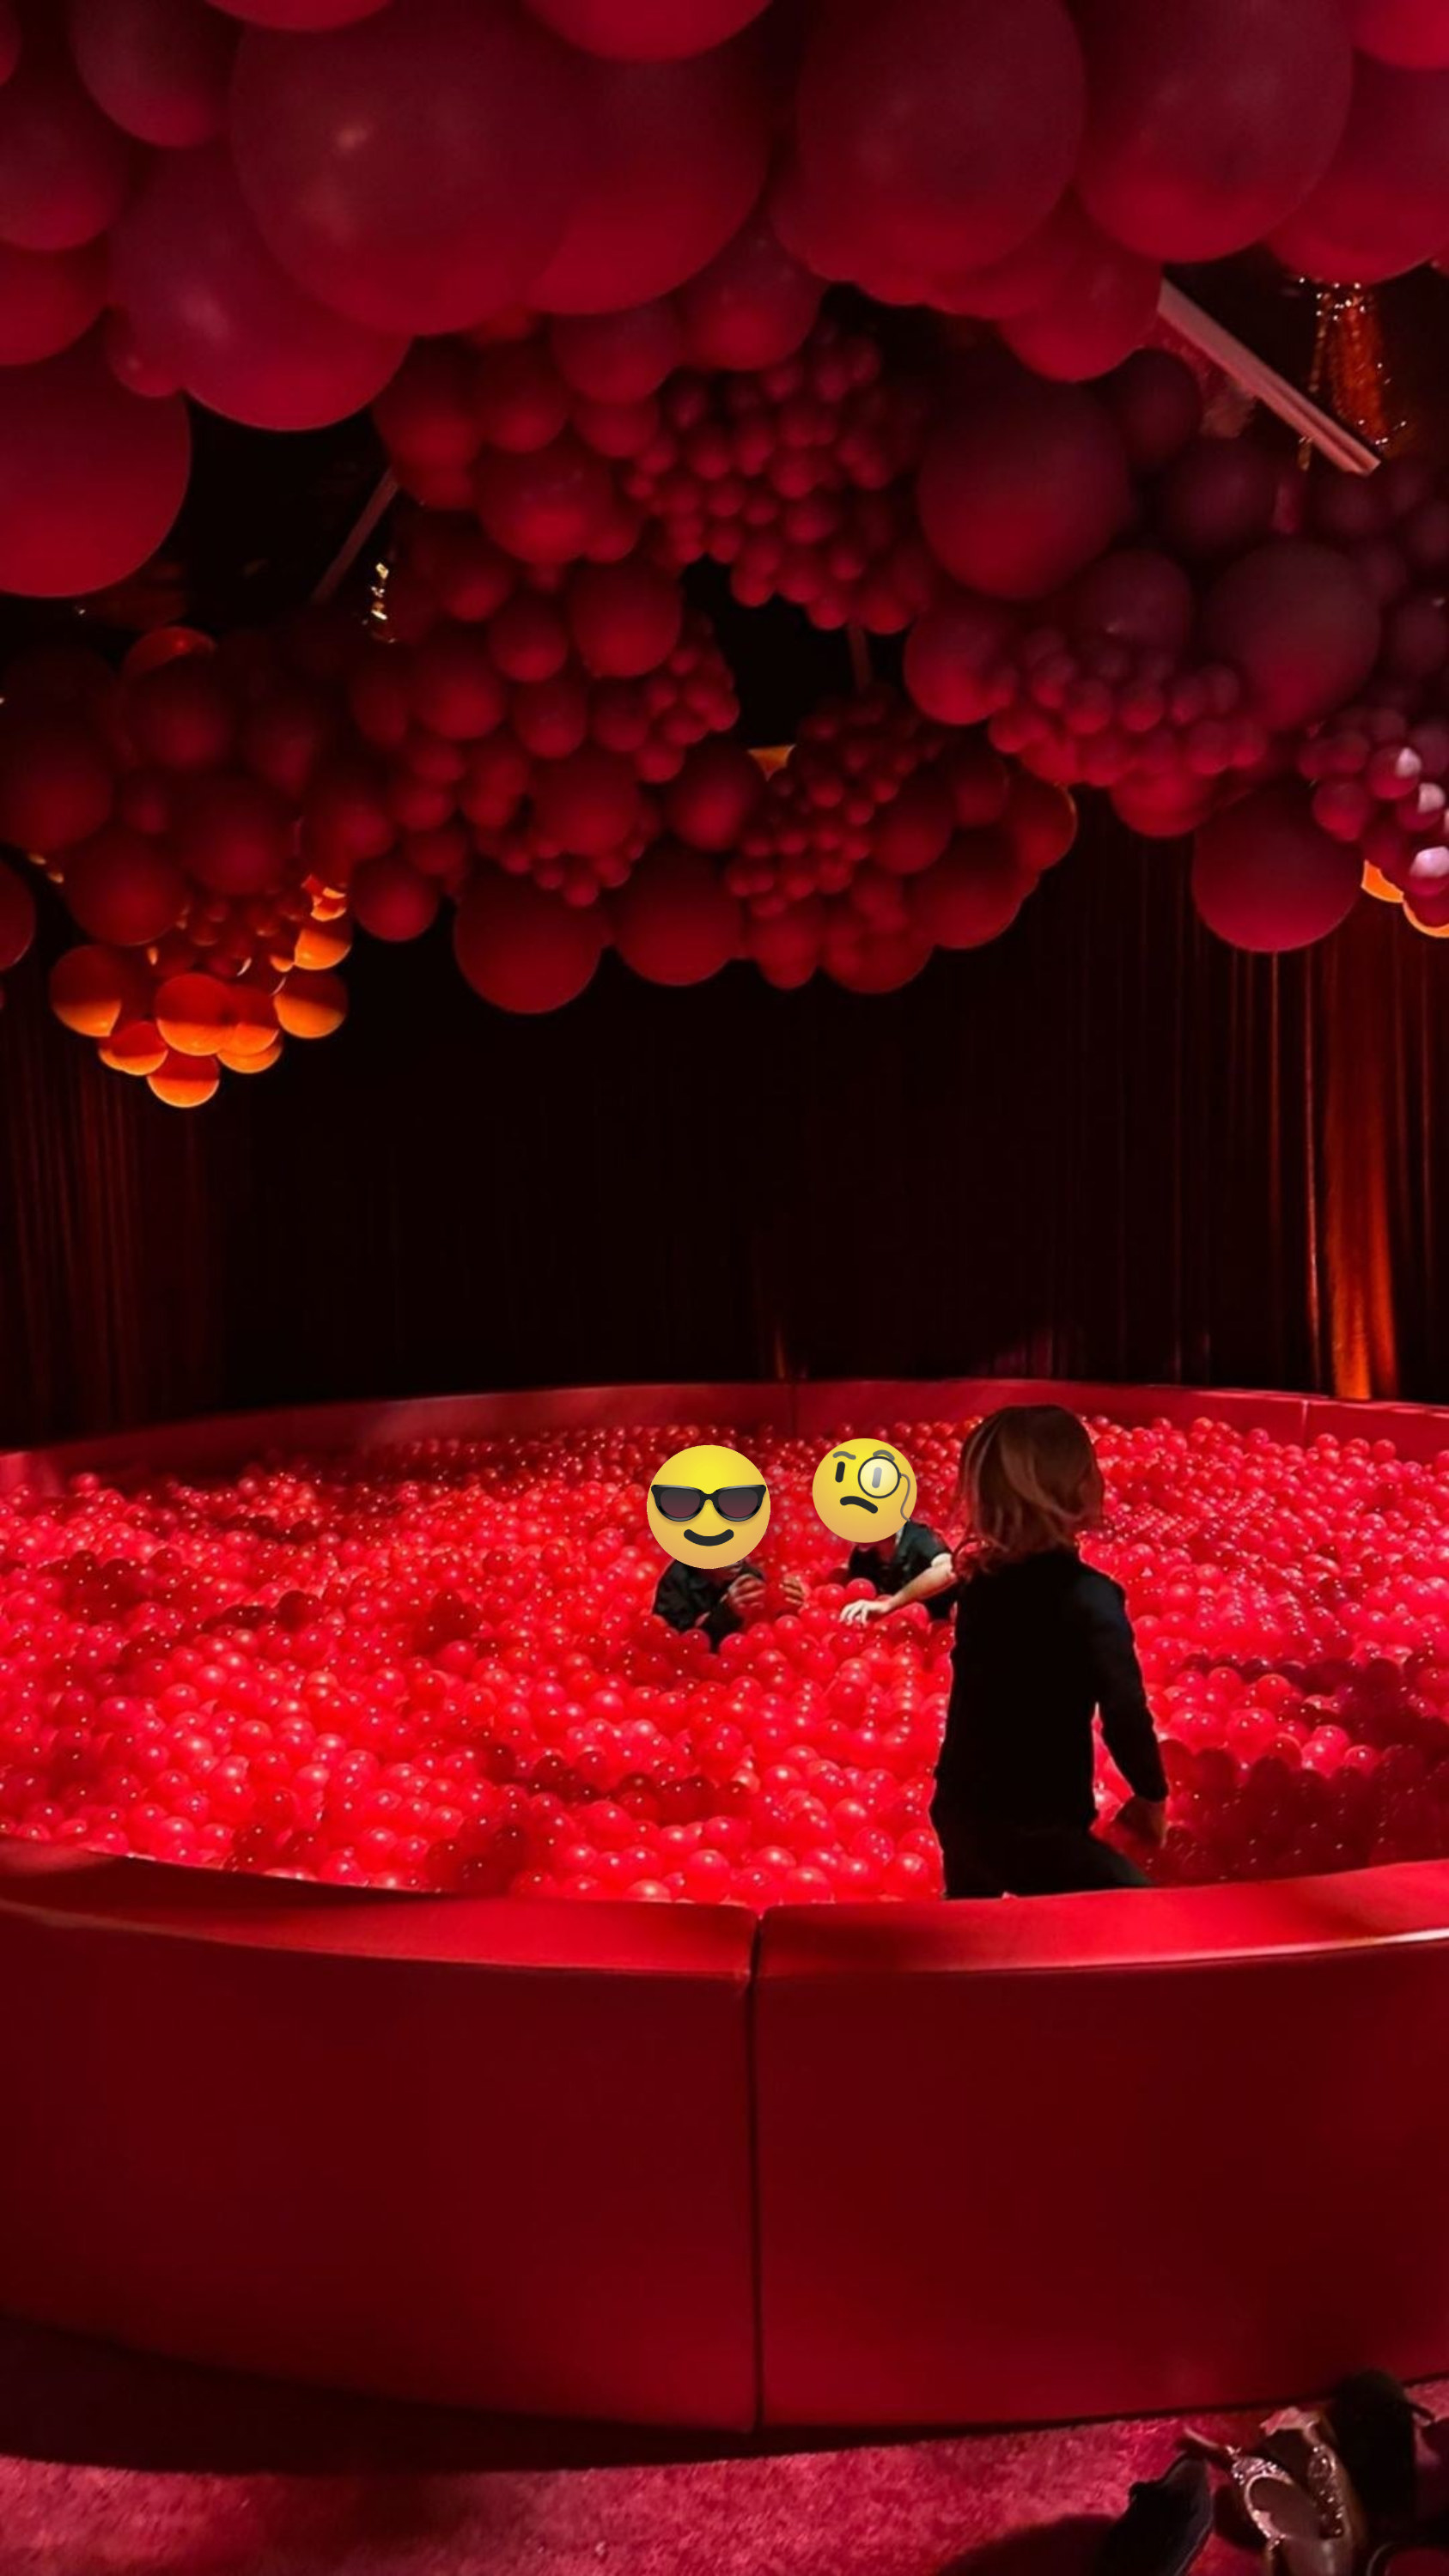 Children in a pit with many, many red balls